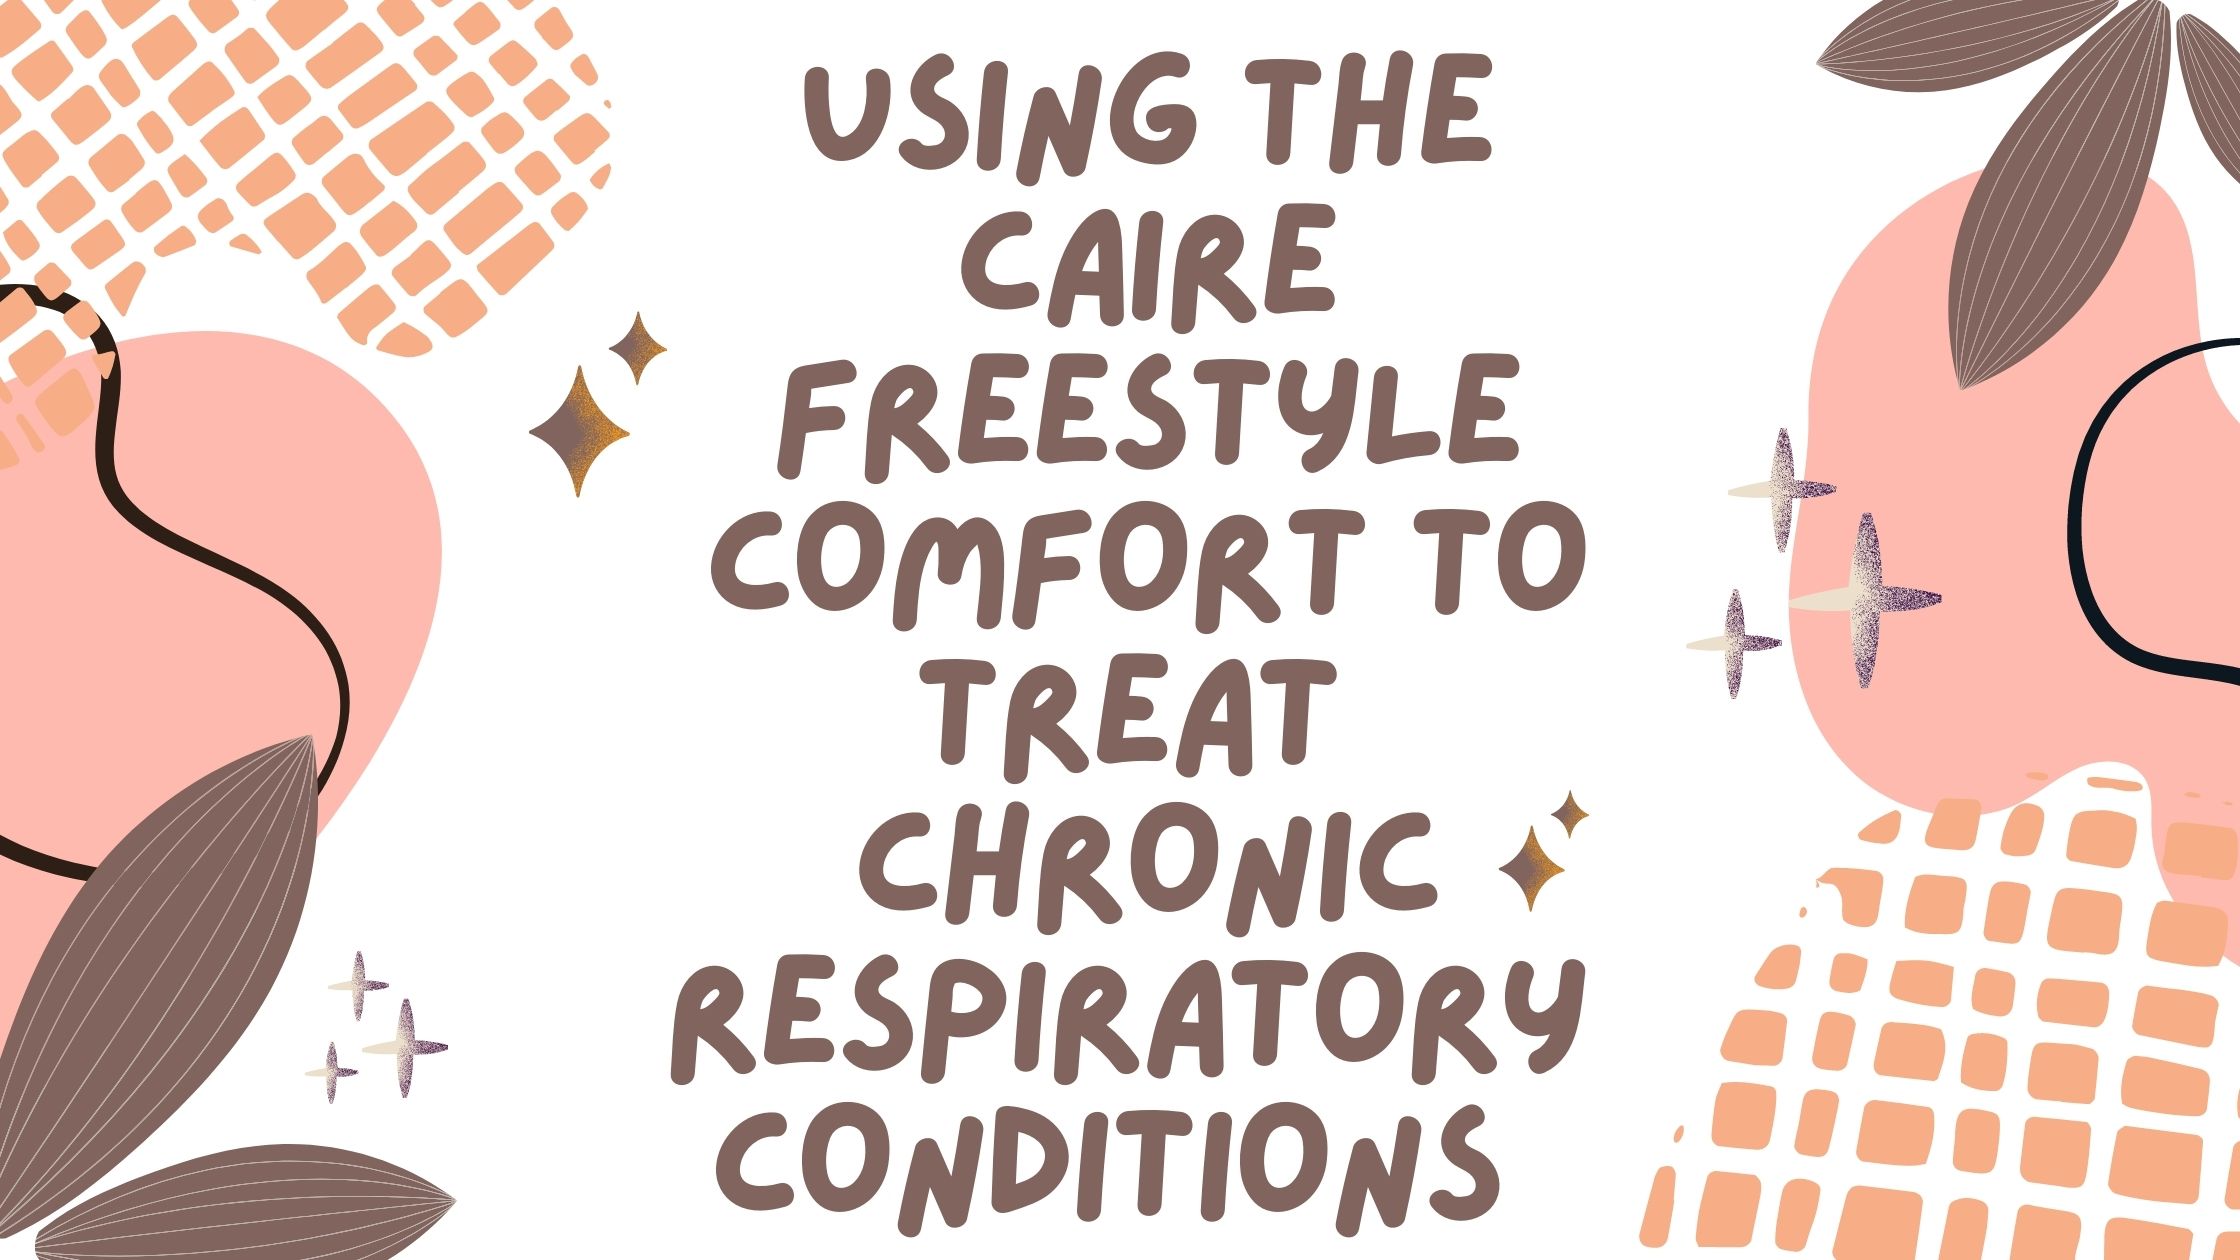 Using the The caire Freestyle Comfort to treat chronic condition